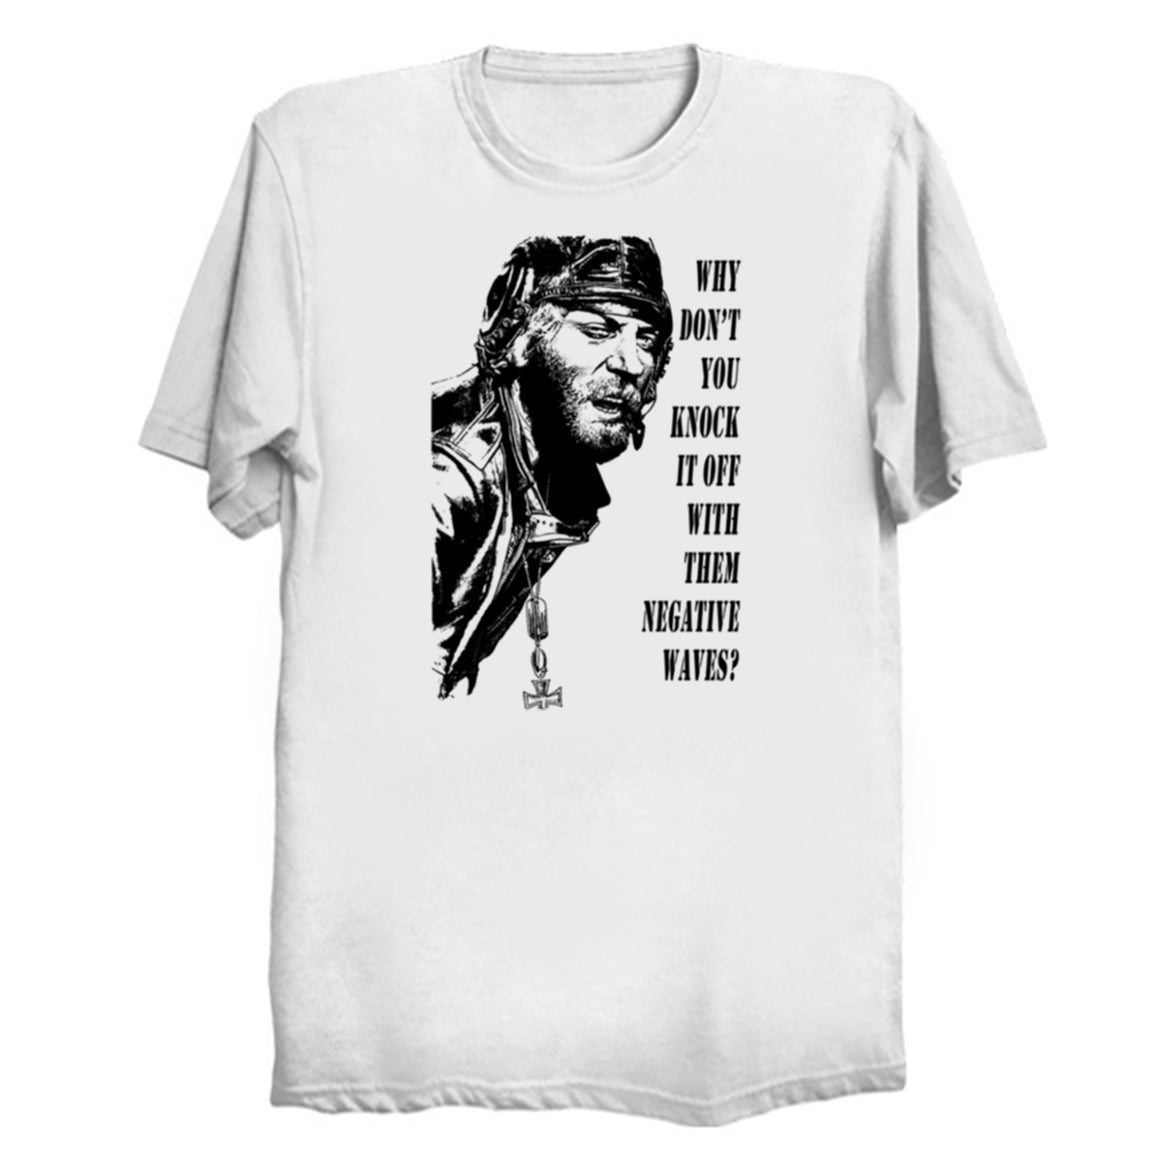 T-shirt featuring Oddball from the movie 1970 Kelly's Heroes, portrayed by Donald Sutherland